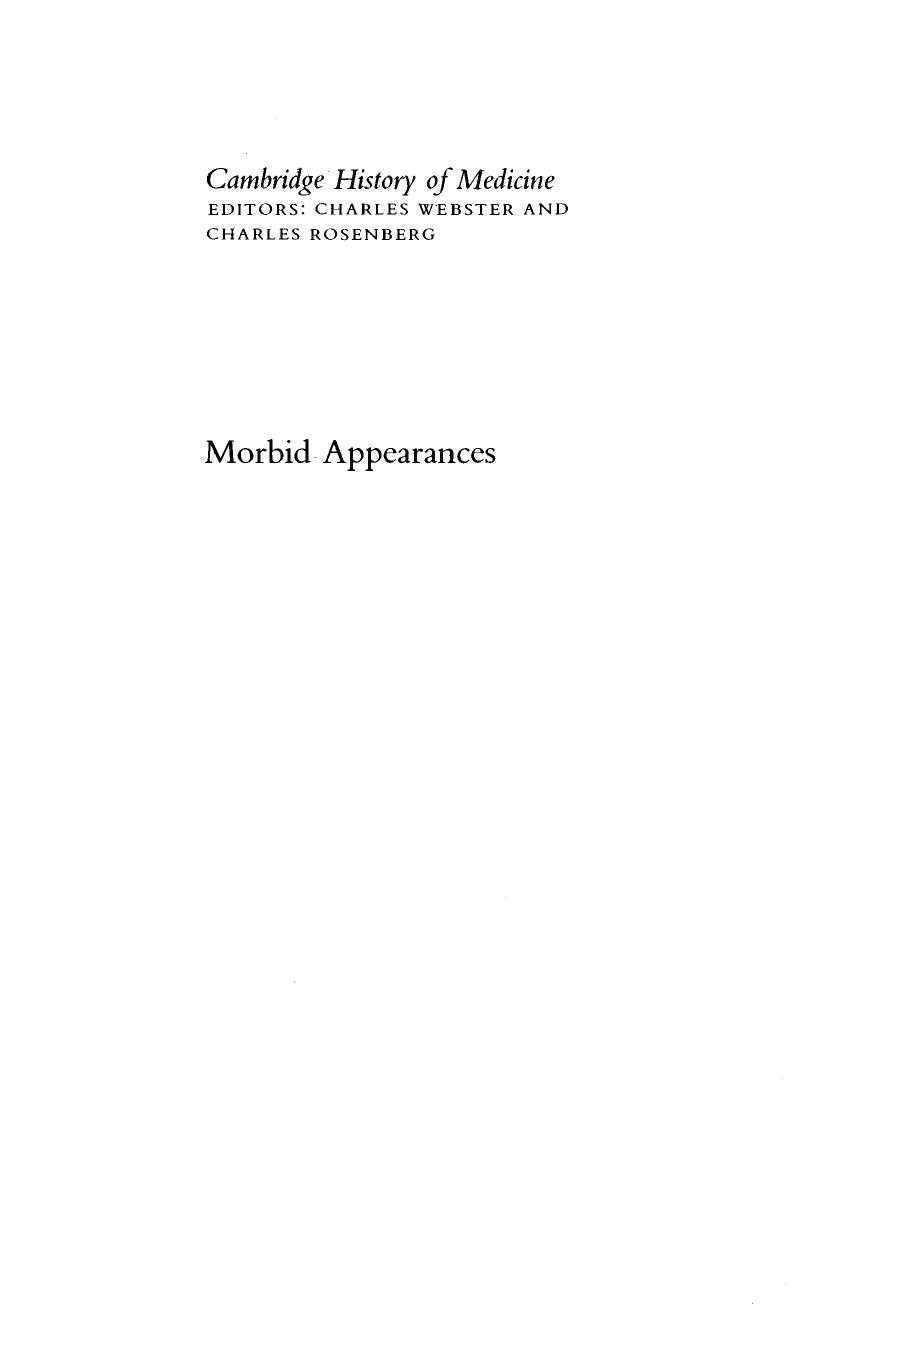 Morbid Appearances  The Anatomy of Pathology in the Early Nineteenth Century 1987.pdf